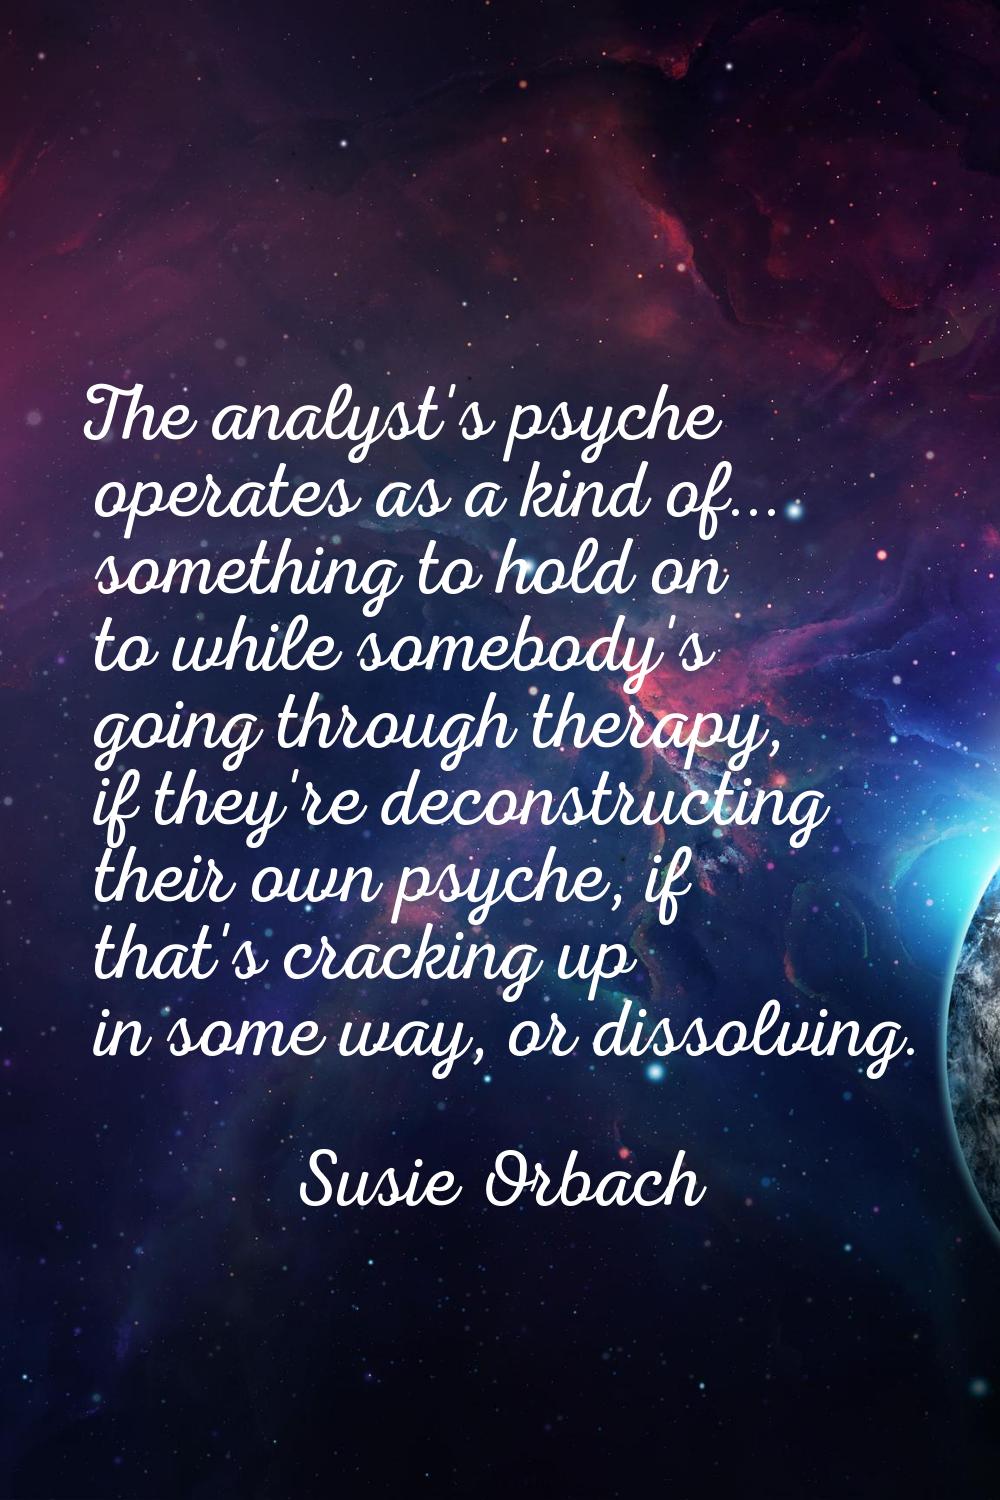 The analyst's psyche operates as a kind of... something to hold on to while somebody's going throug